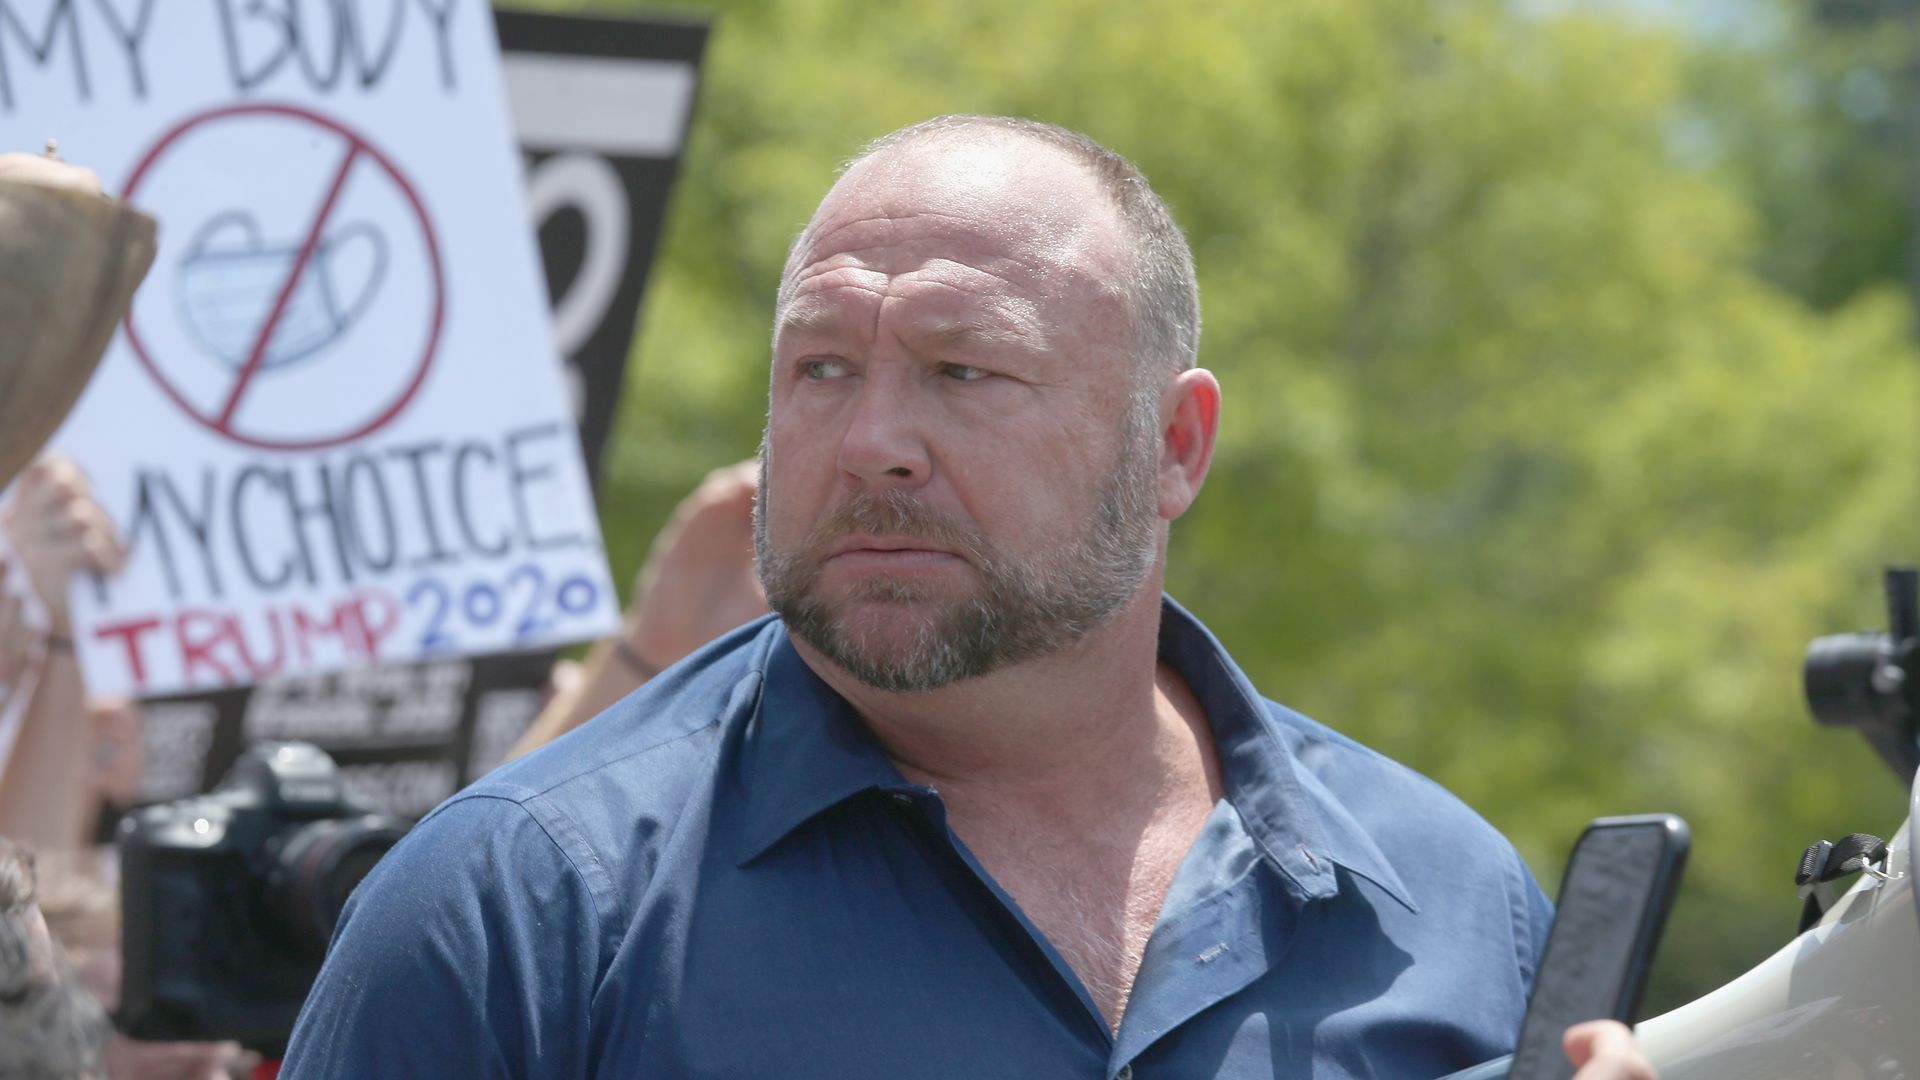 Alex Jones during a protest at the Texas State Capitol in Austin in April 2020.